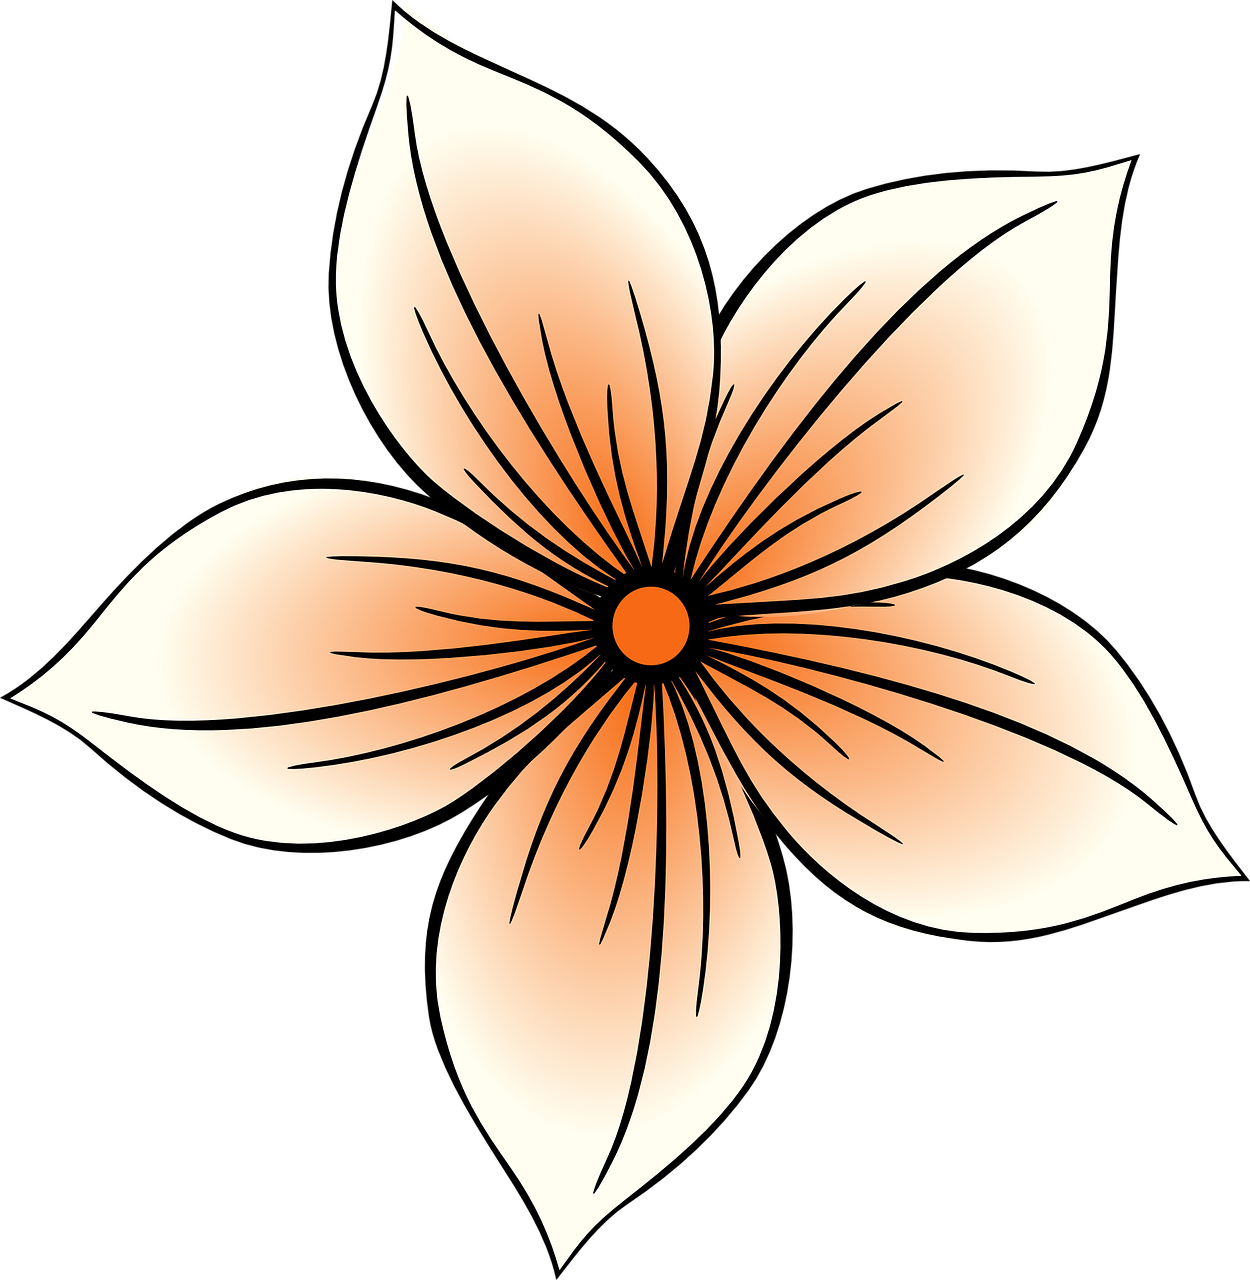 A Flower With Leaves On It